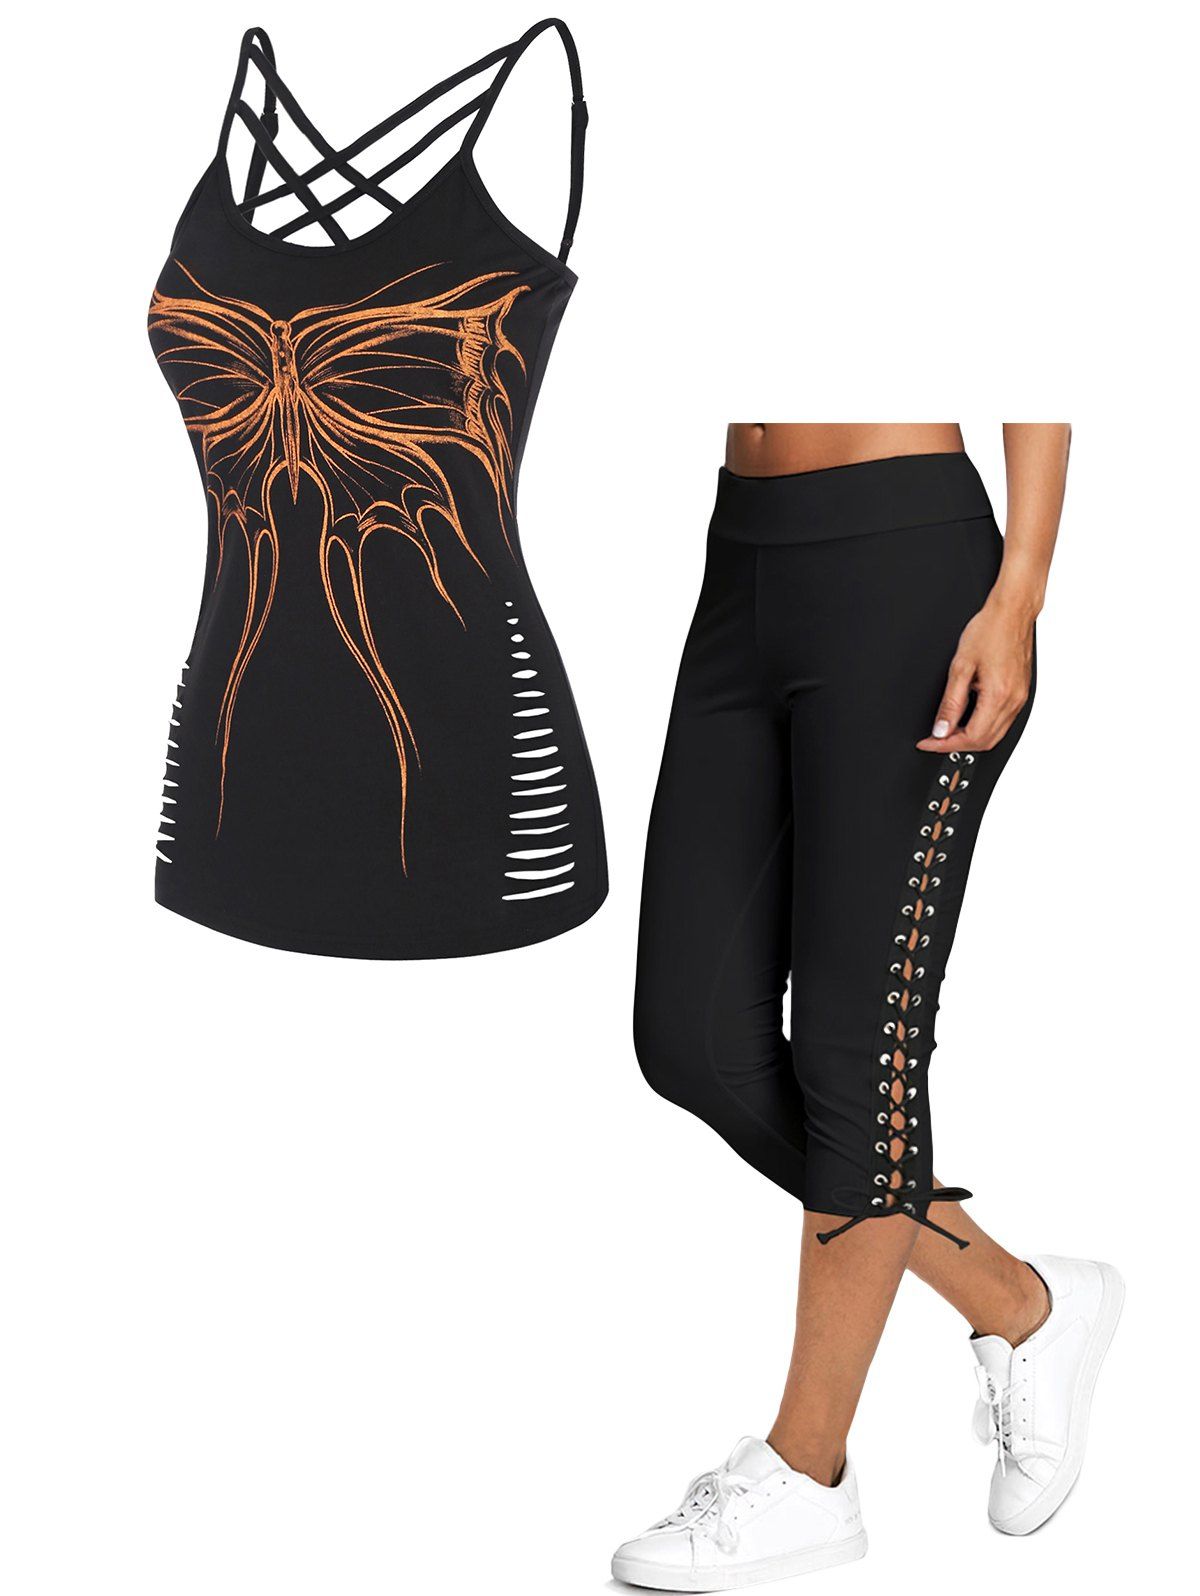 Contrast Butterfly Print Ripped Crisscross Lattice Strappy Tank Top And Lace Up Skinny Crop Leggings Summer Outfit - multicolor S